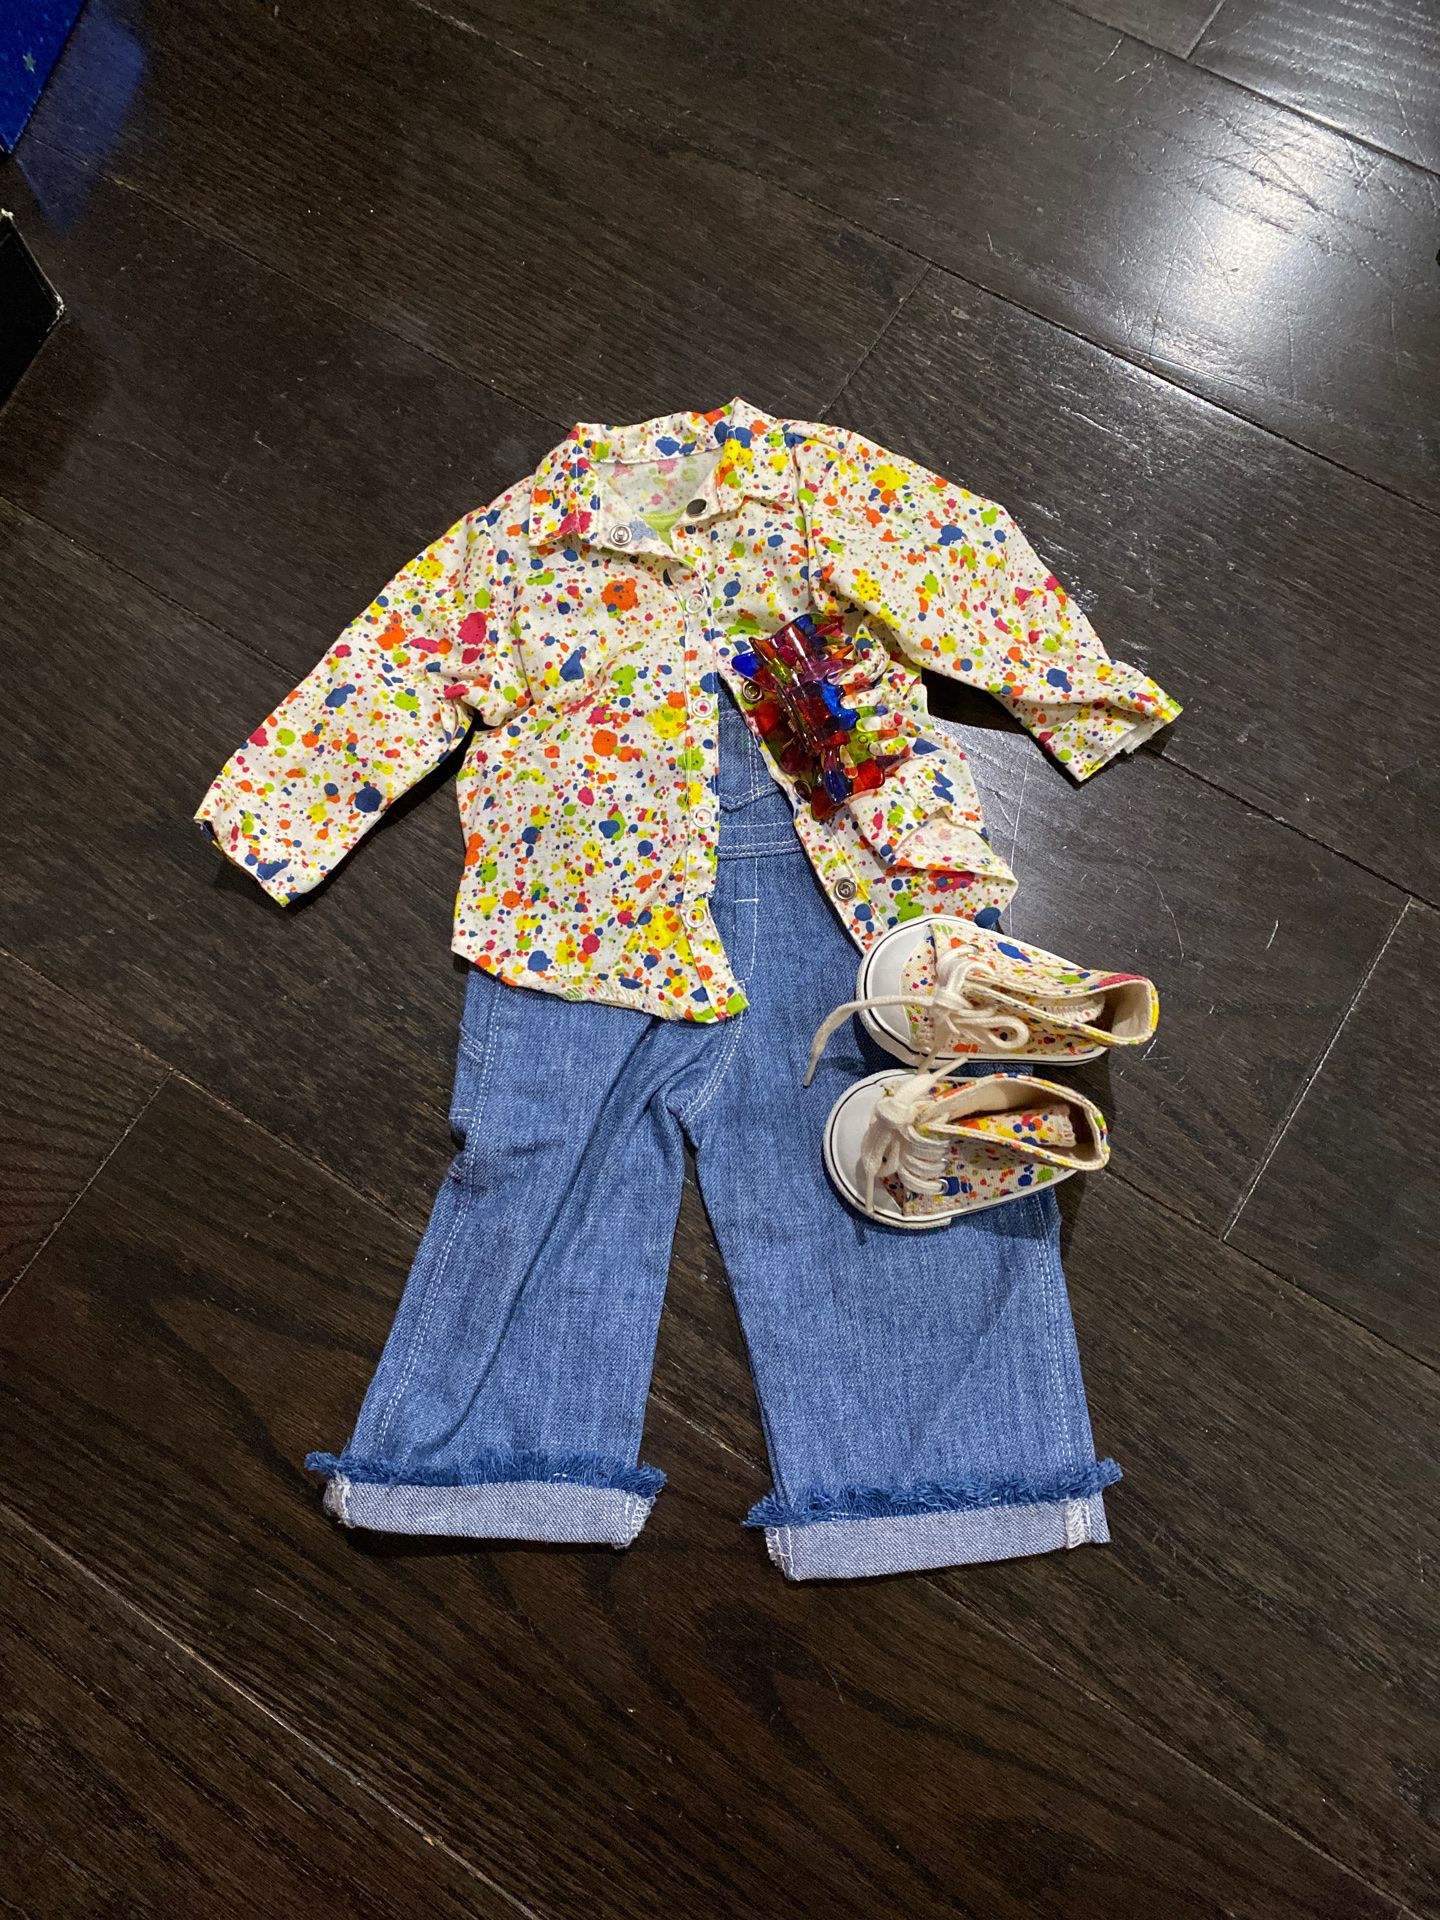 American Girl Artist Outfit